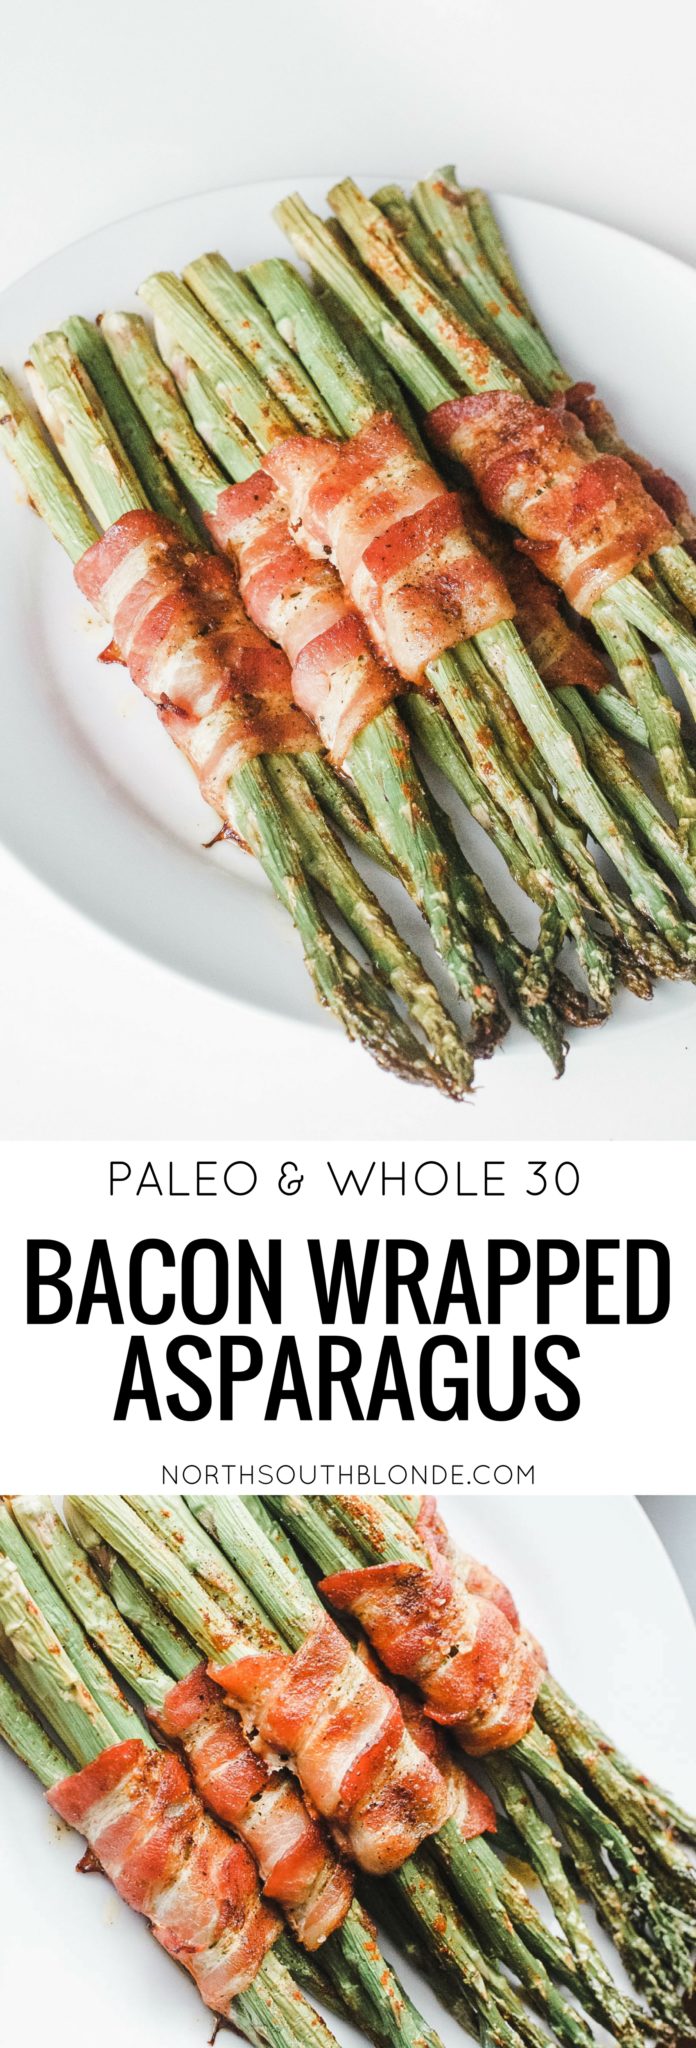 Bacon Wrapped Asparagus is the perfect side dish at dinnertime. Great for lunch or meal prepping as well. They're full of flavour and only 20 minutes to make! Brakfast | Lunch | Dinner | Sides | Side Dish | Uncured Bacon | Organic | NON GMO | Paleo | Whole 30 | Gluten-free | GF | Easy | Quick | Vegetables | Veggies | Keto | Ketogenic Diet | Weight Loss | Lose Weight | Low Carb | Protein | 